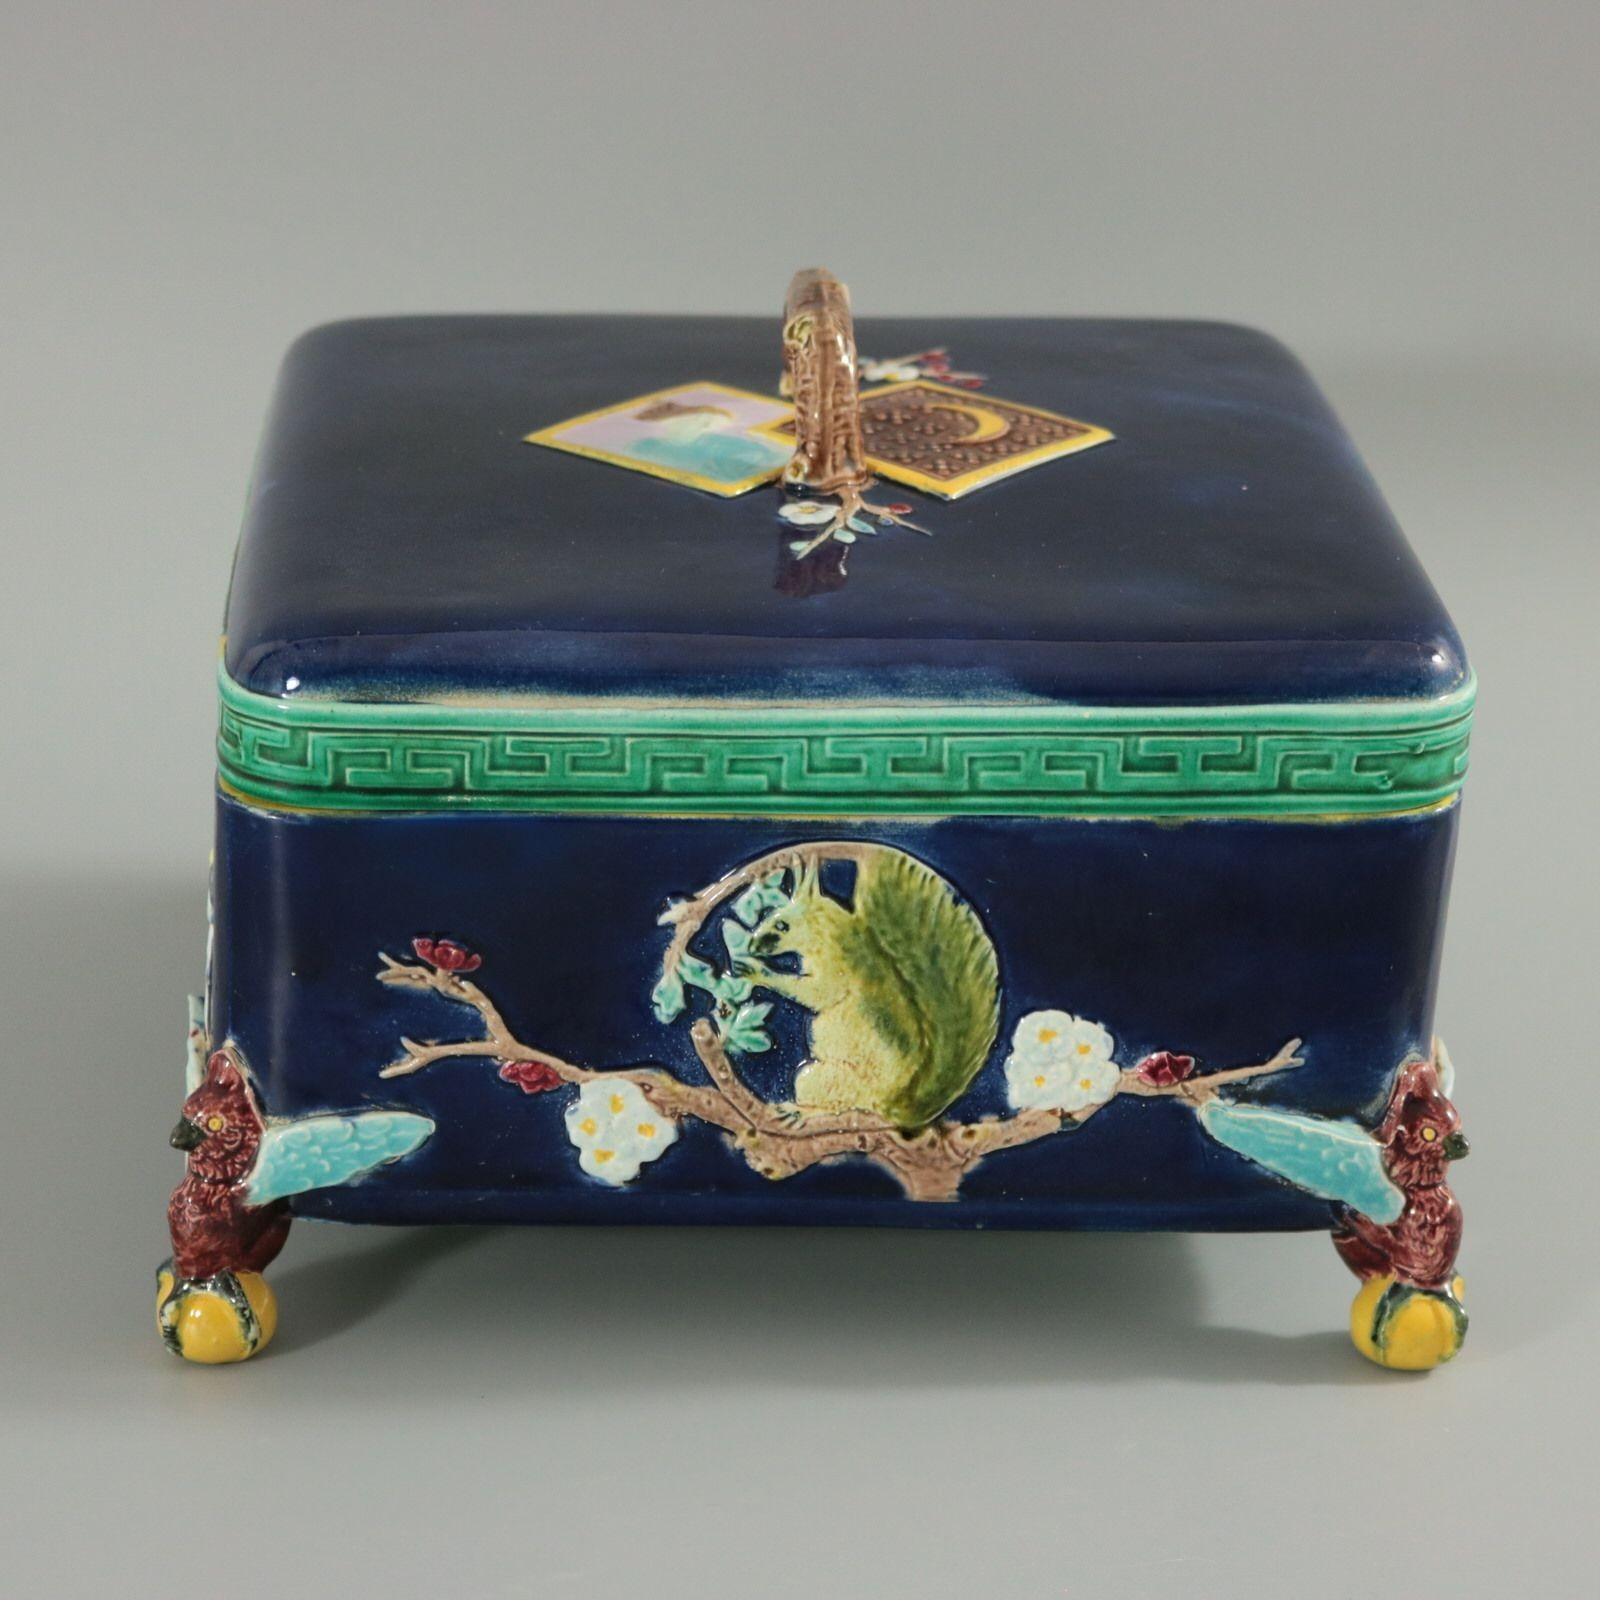 Holdcroft Majolica square box and cover which features storks, squirrels, blossom and parrot feet. Coloration: cobalt blue, green, turquoise, are predominant. The piece bears maker's marks for the Holdcroft Pottery.